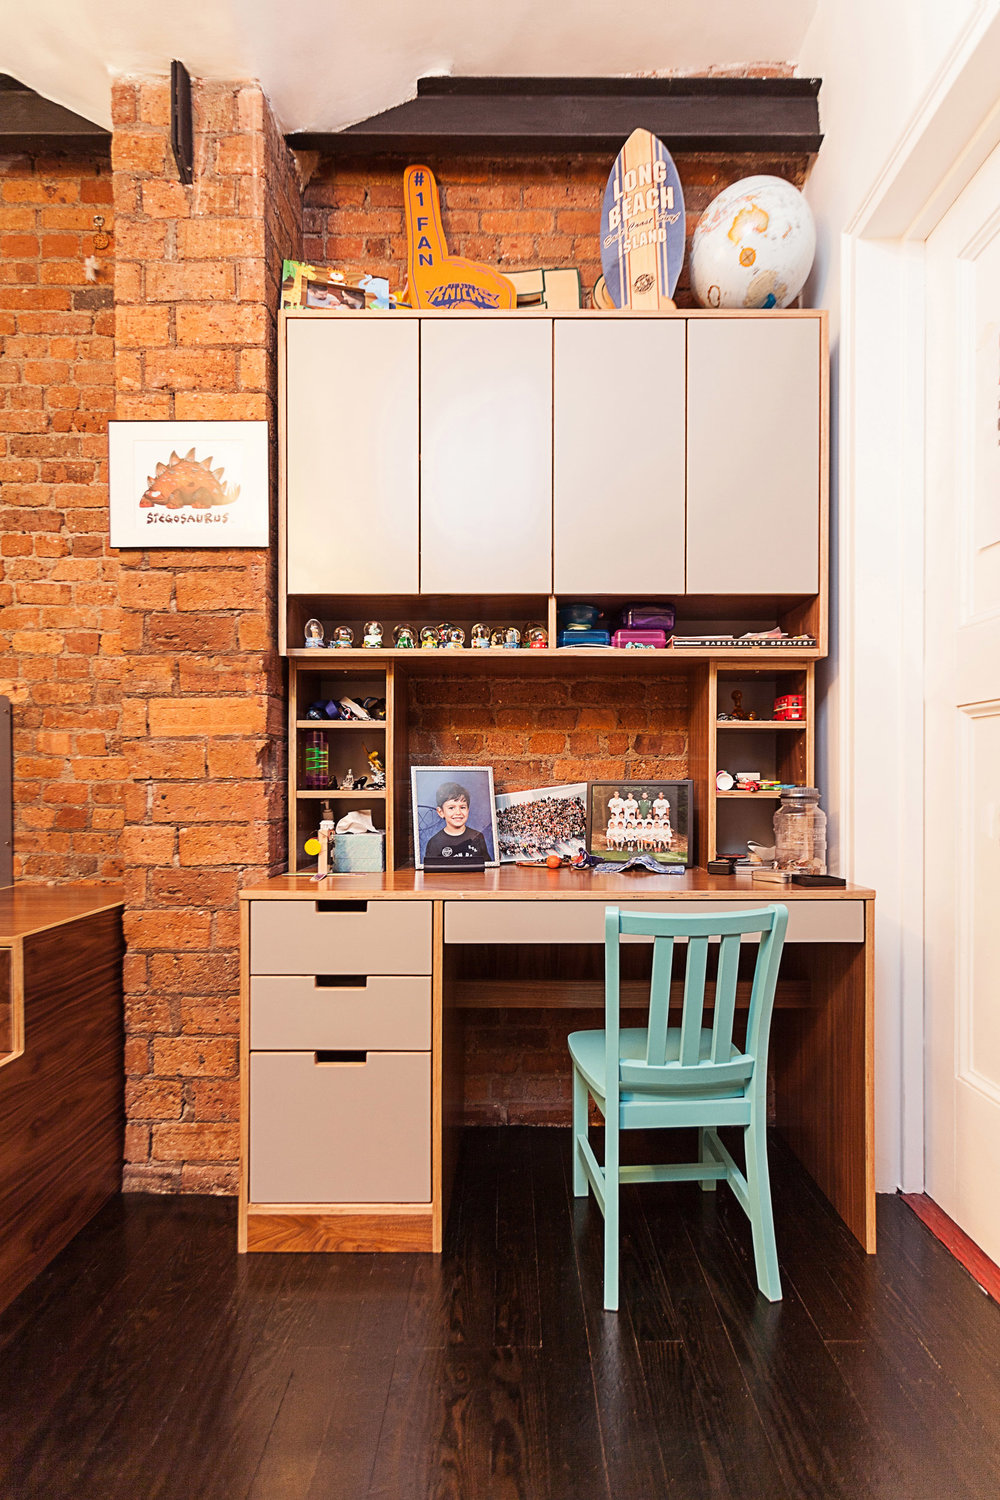 Cozy home office with wooden desk, blue chair, shelves, and a brick wall backdrop.